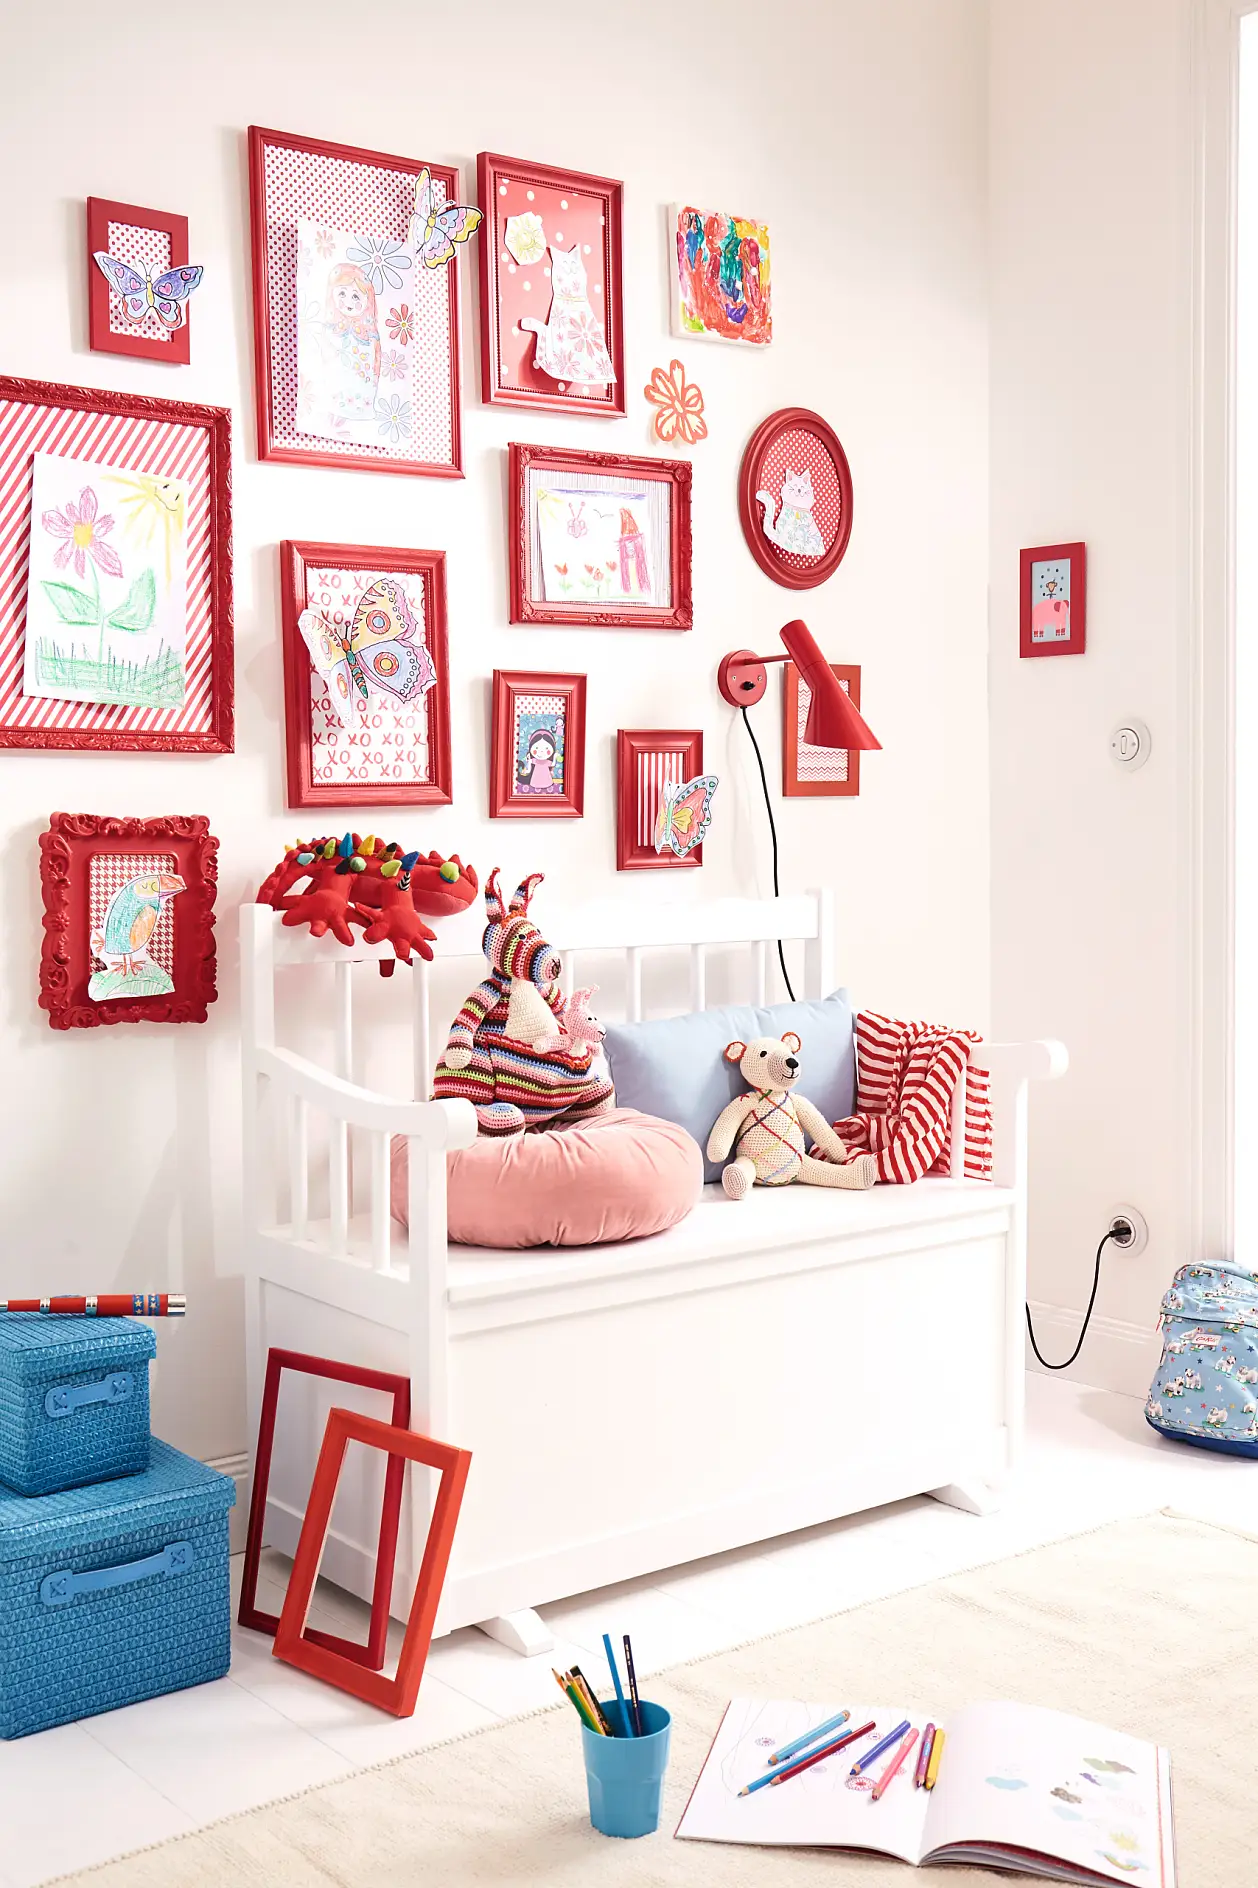 Let the kids enjoy their own DIY gallery wall!